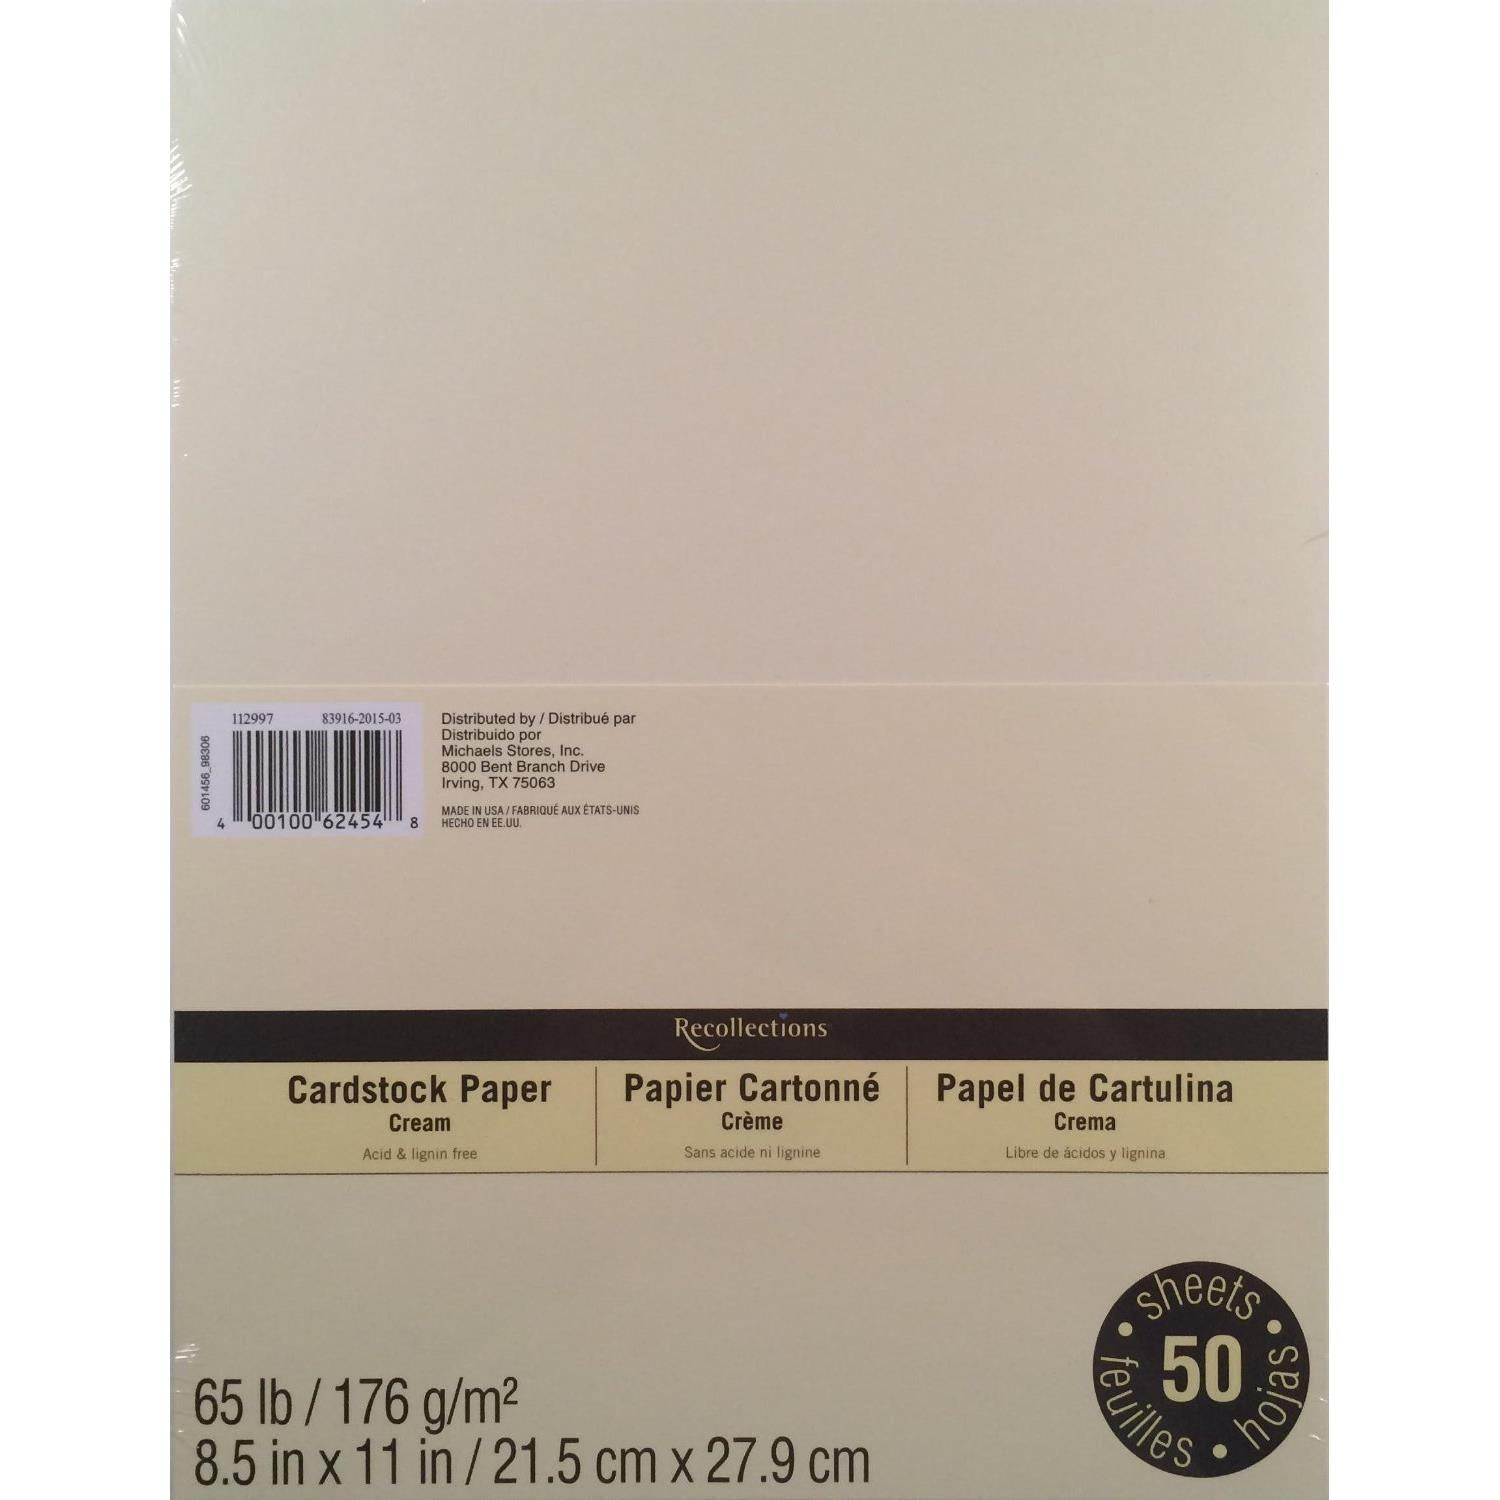 Recollections Cardstock Paper, Cream Colors 8 1/2 x 11 (Value 2-Pack)